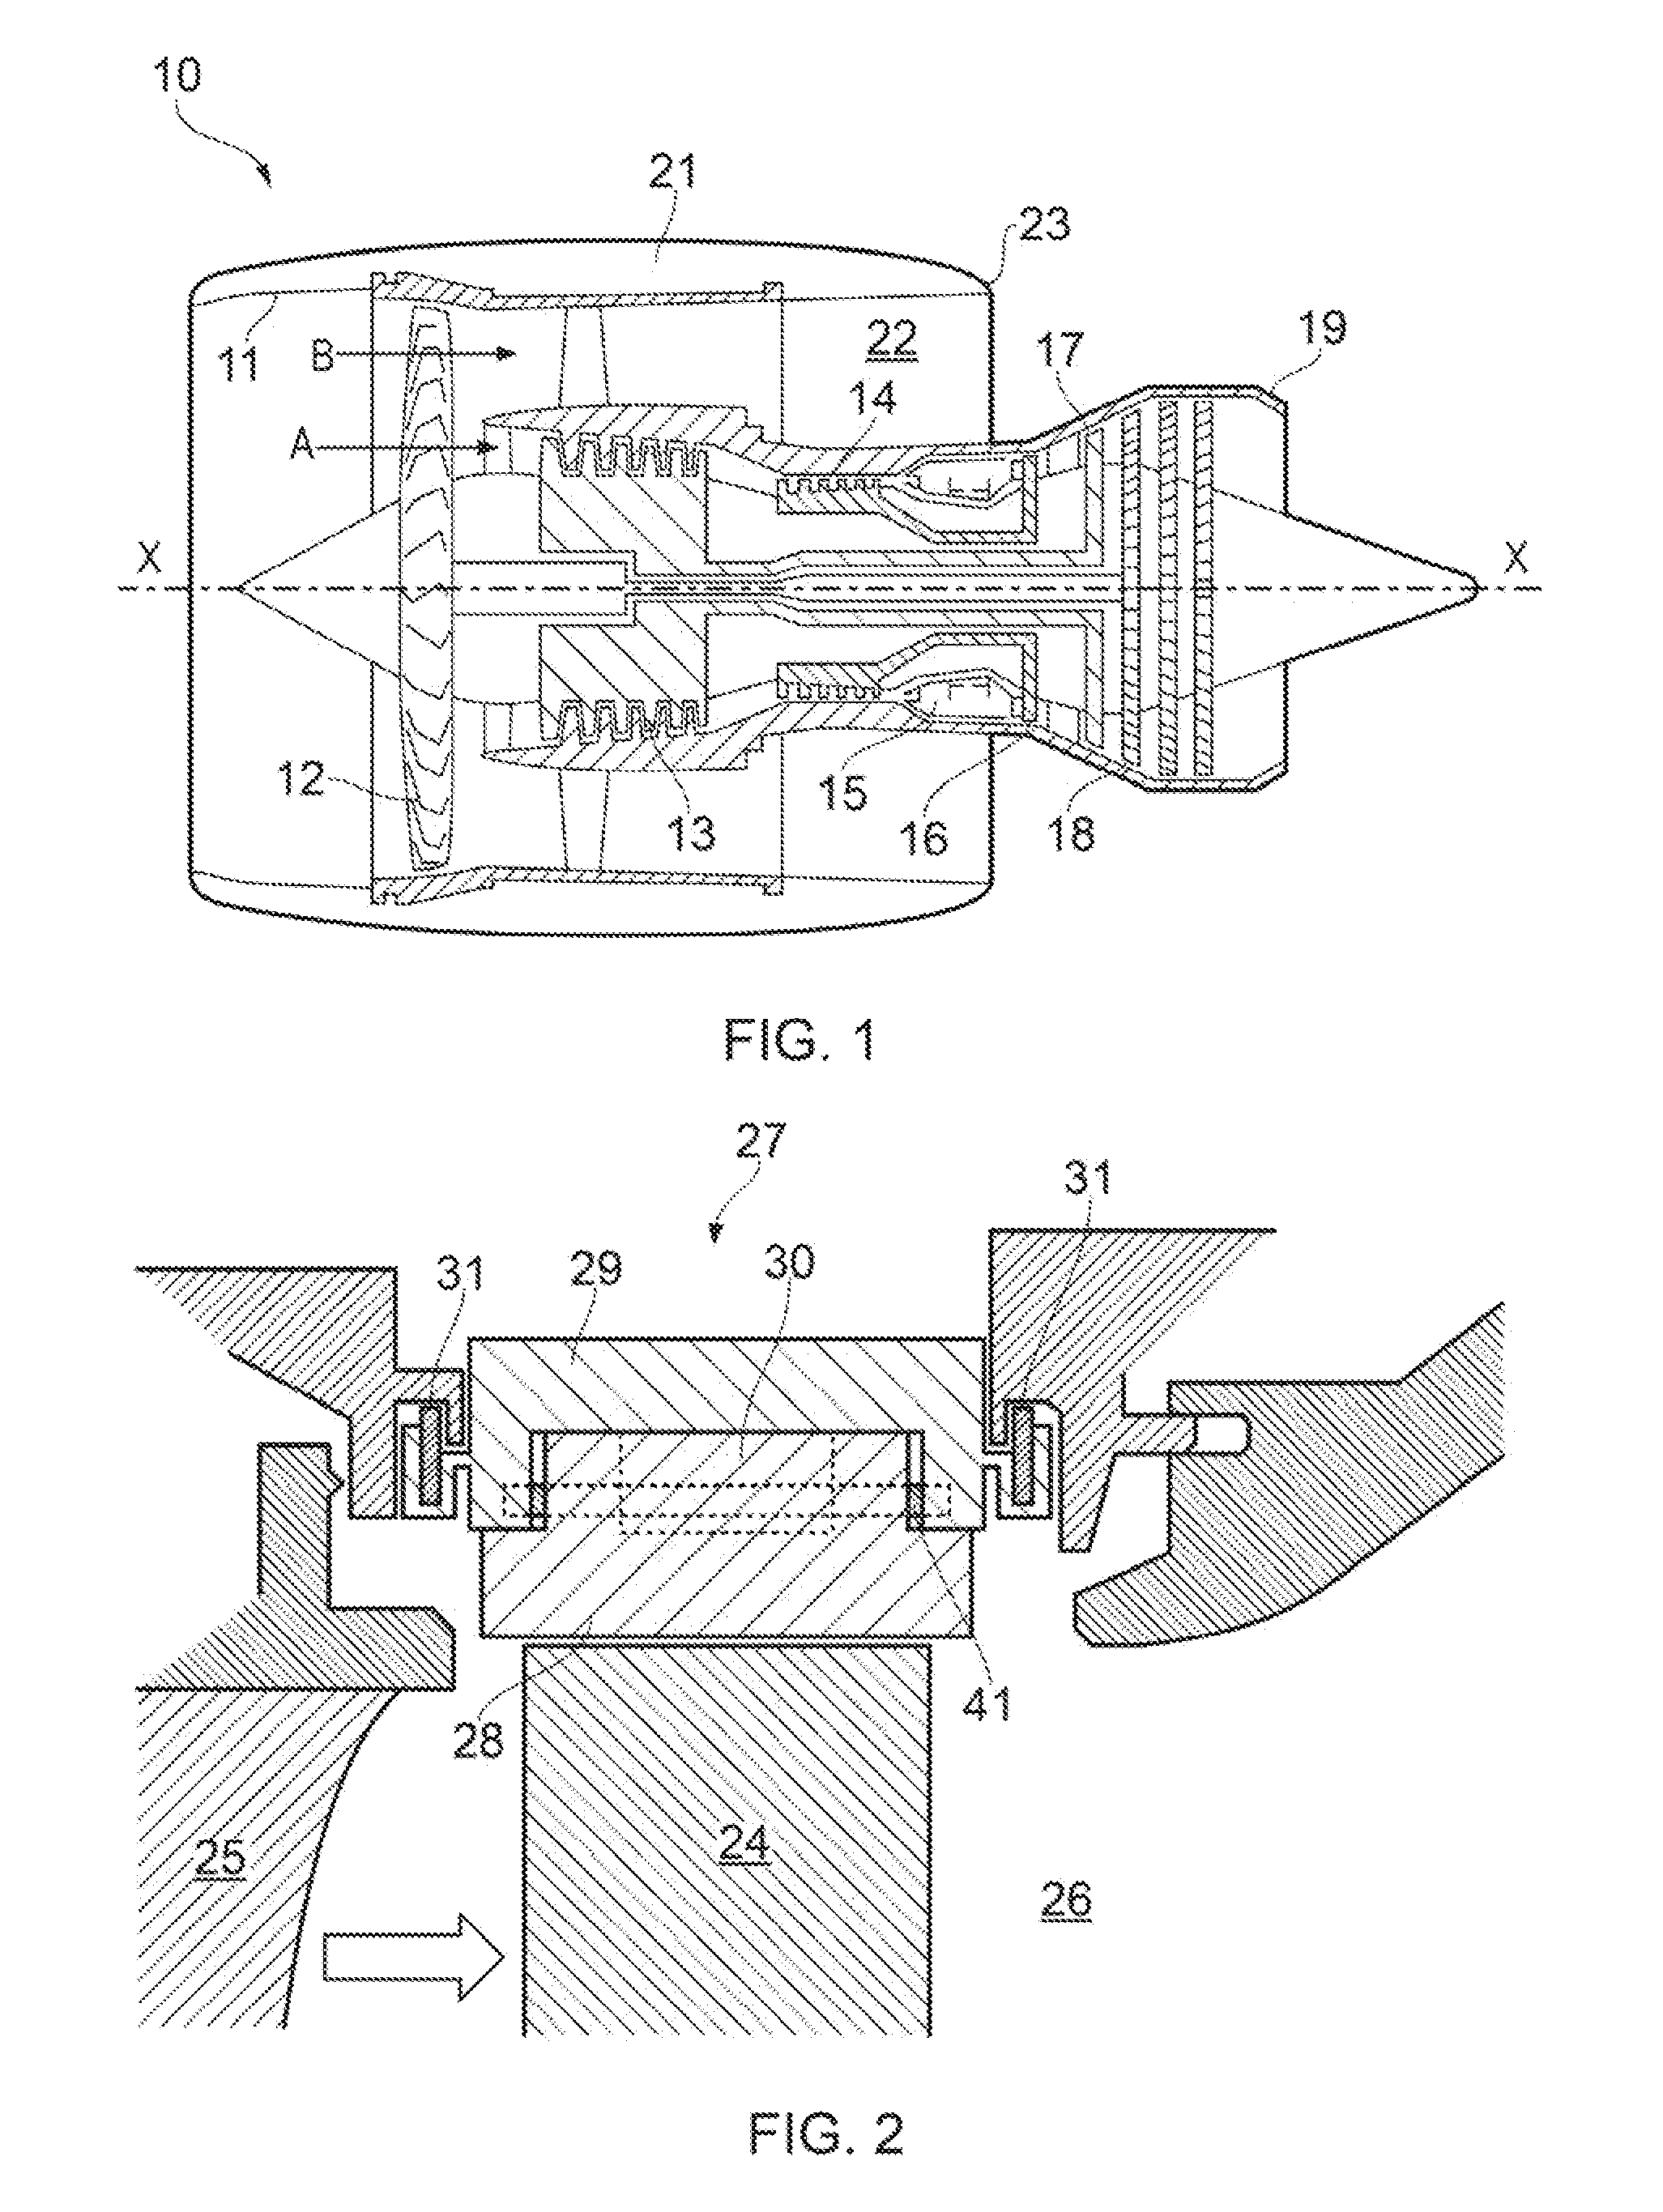 Wall section for the working gas annulus of a gas turbine engine